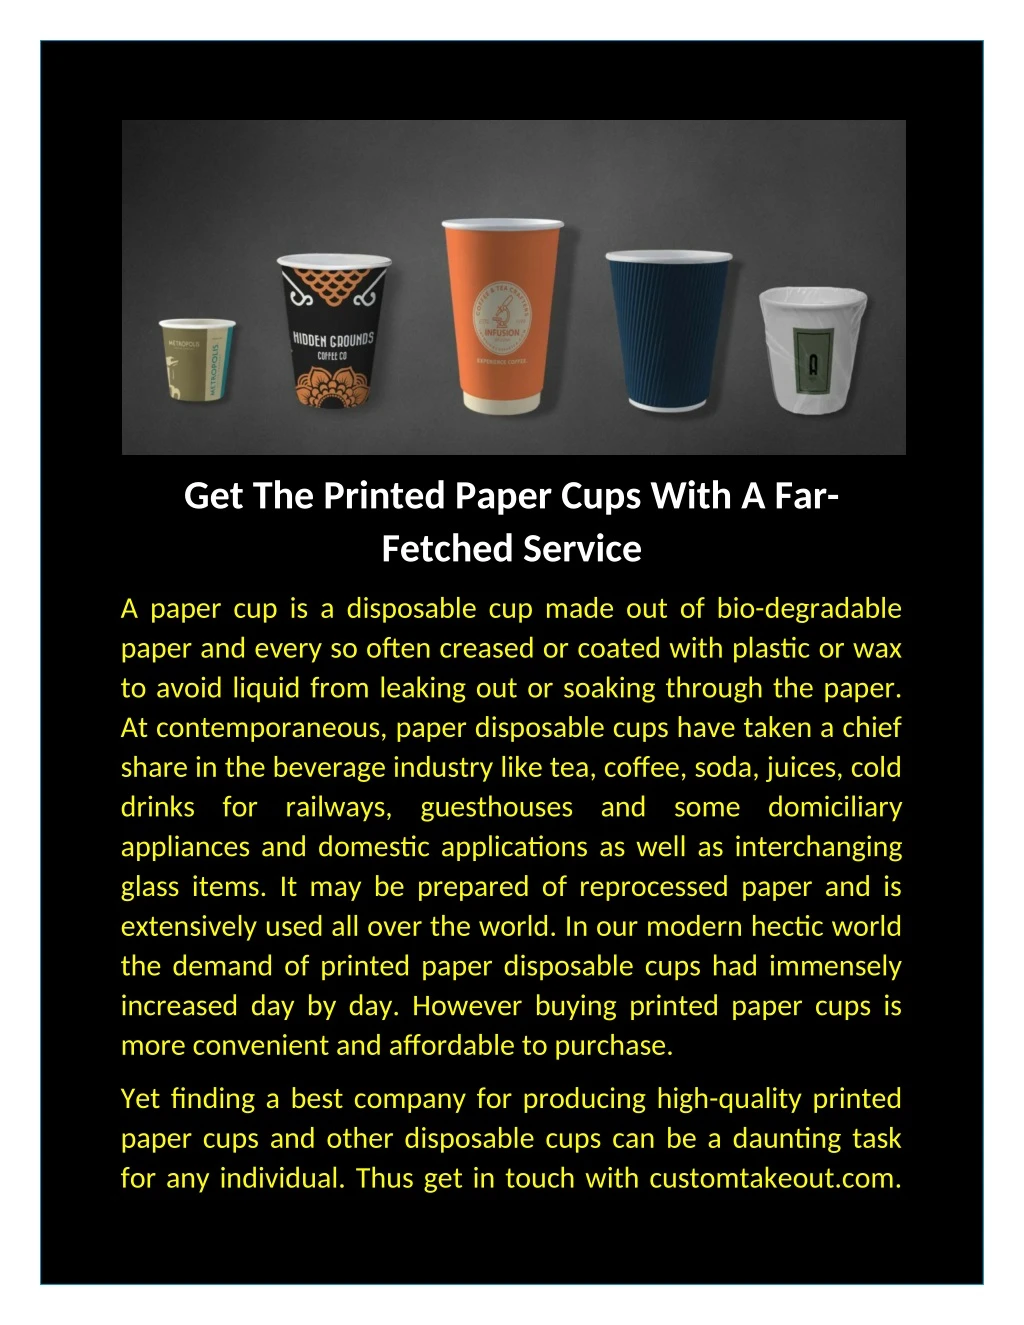 get the printed paper cups with a far fetched